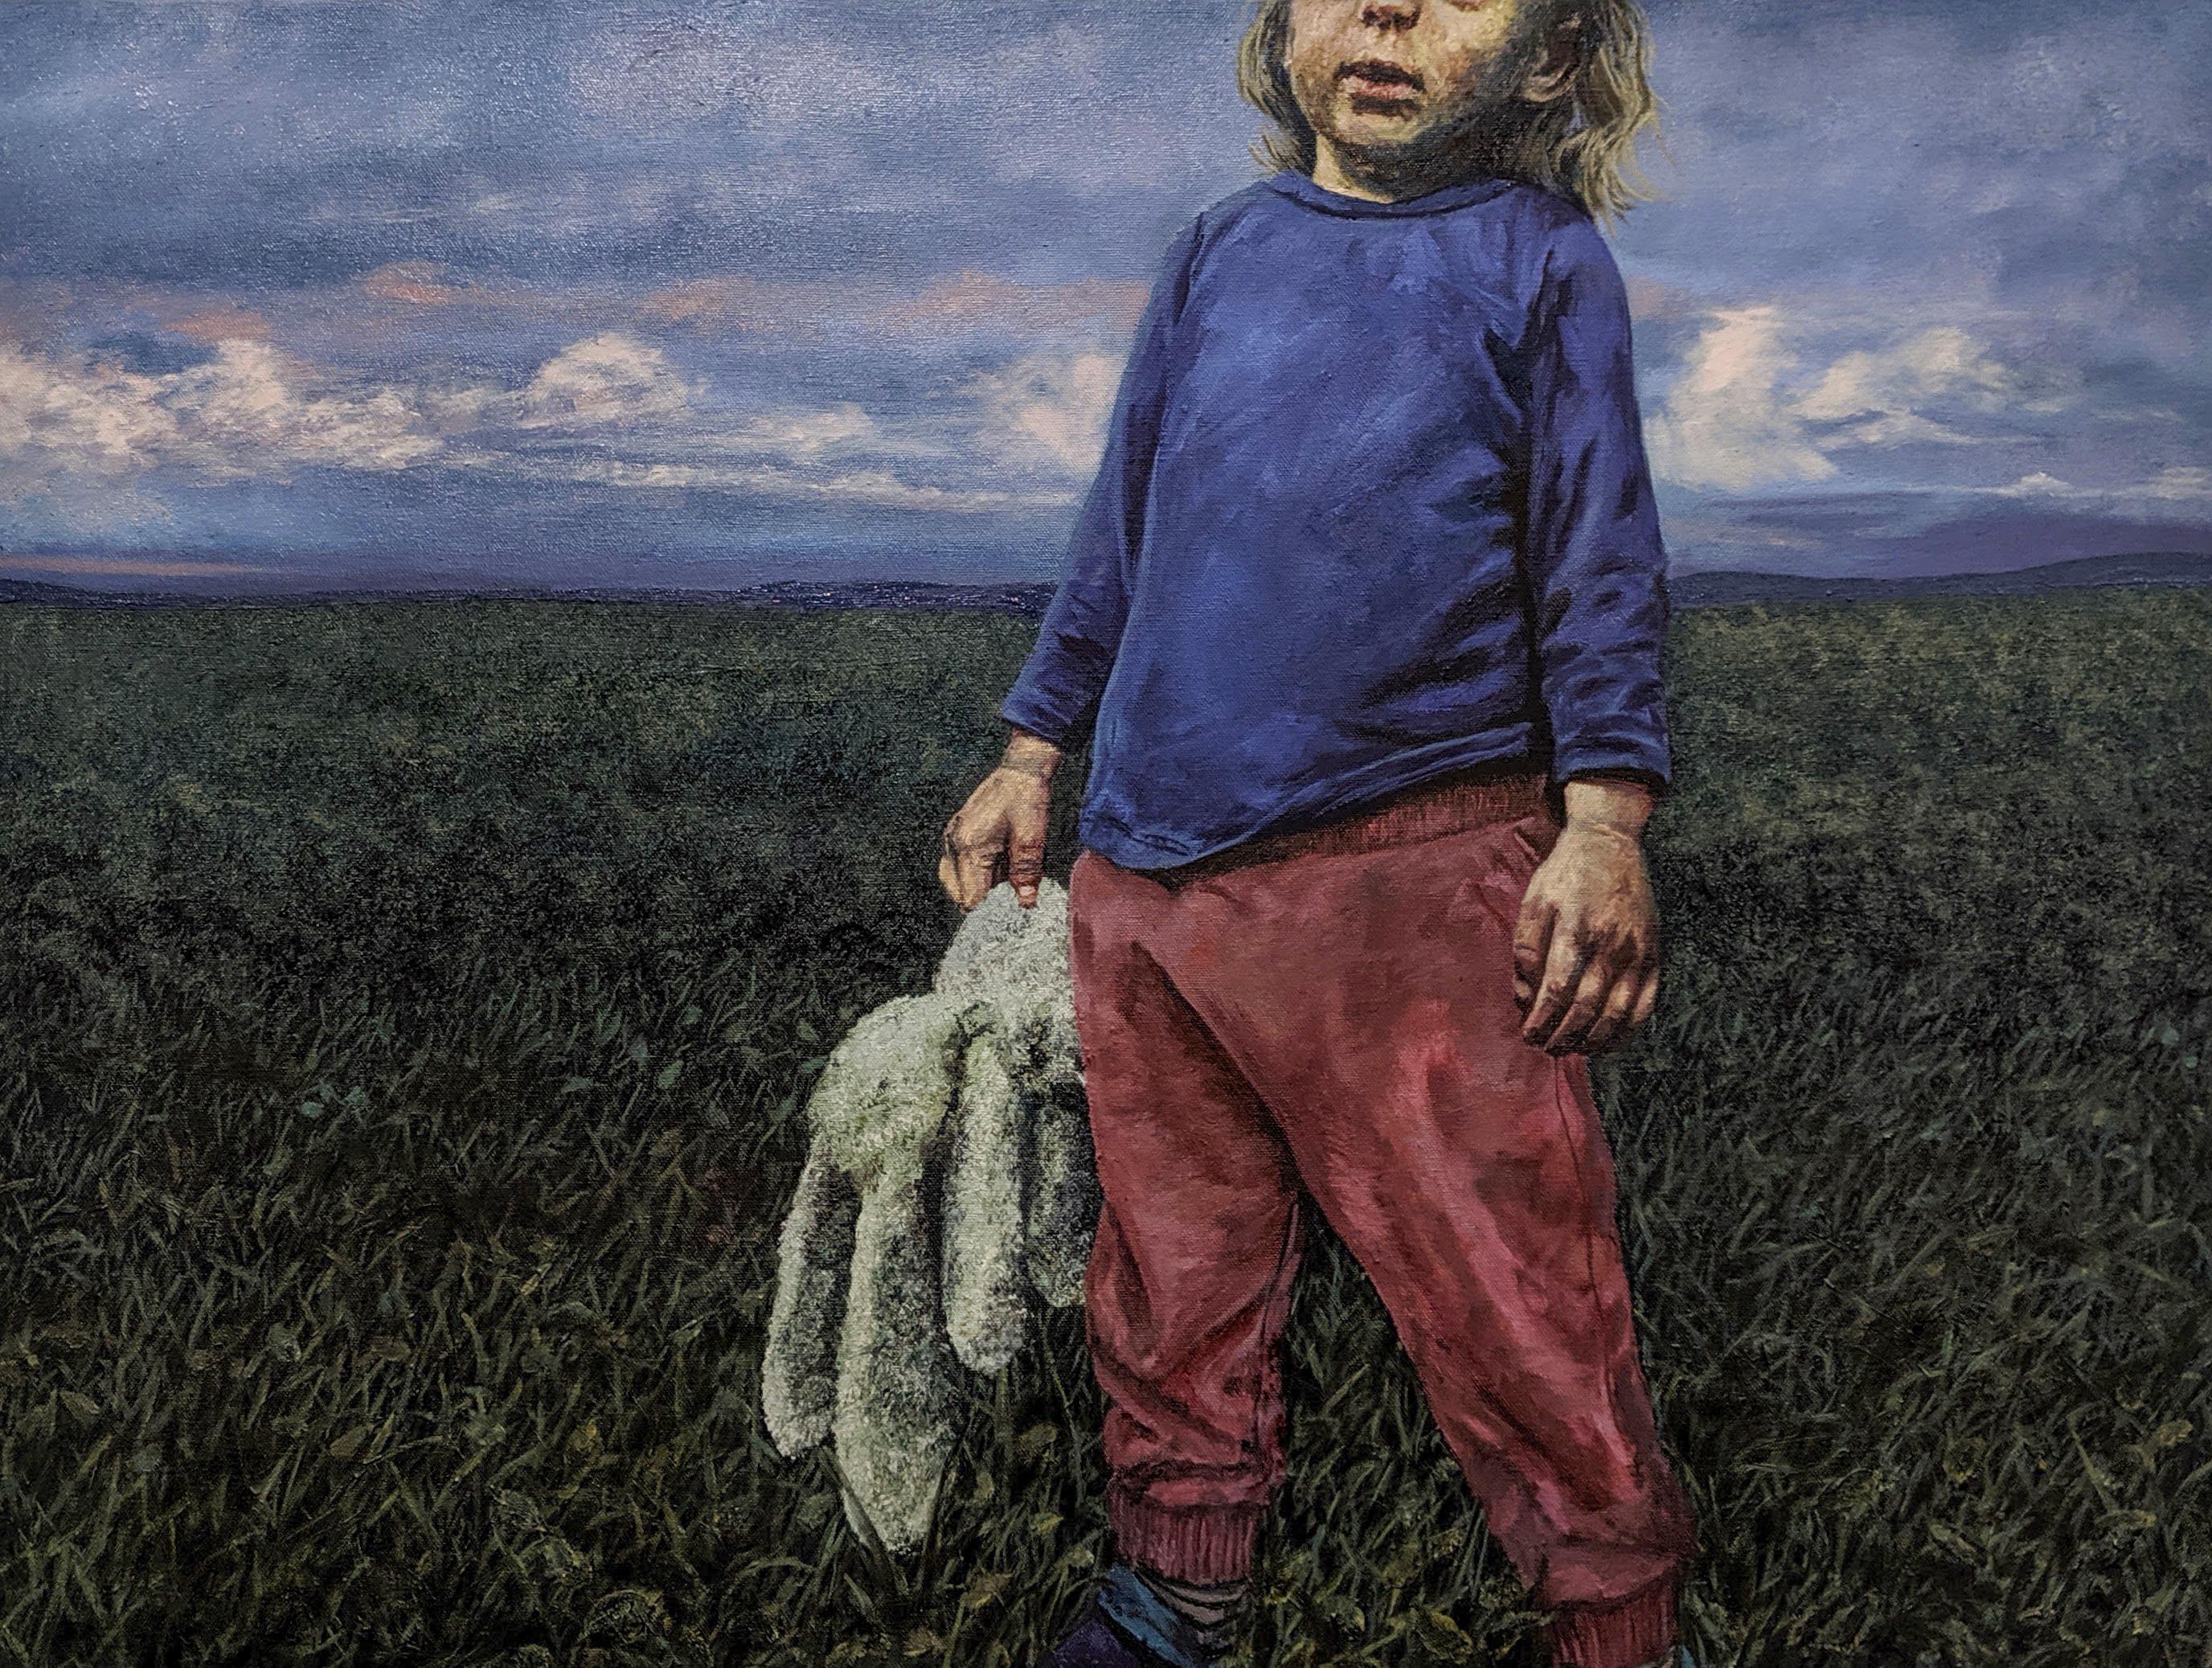 Annika Tucksmith Landscape Painting - Maybe Its Only Us: Figurative Painting of Young Boy in Stormy Country Landscape